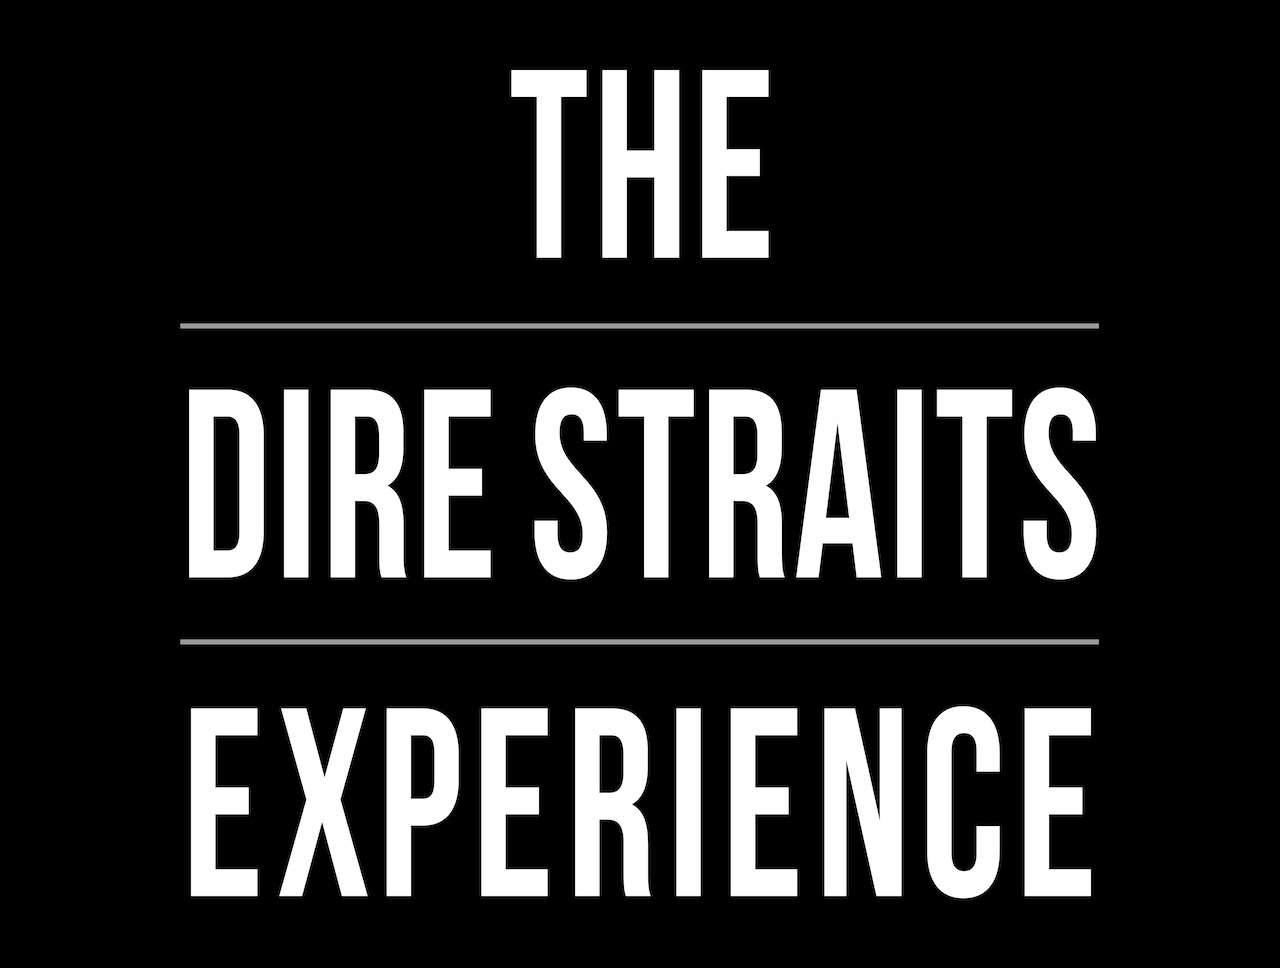 Billets The Dire Straits Experience